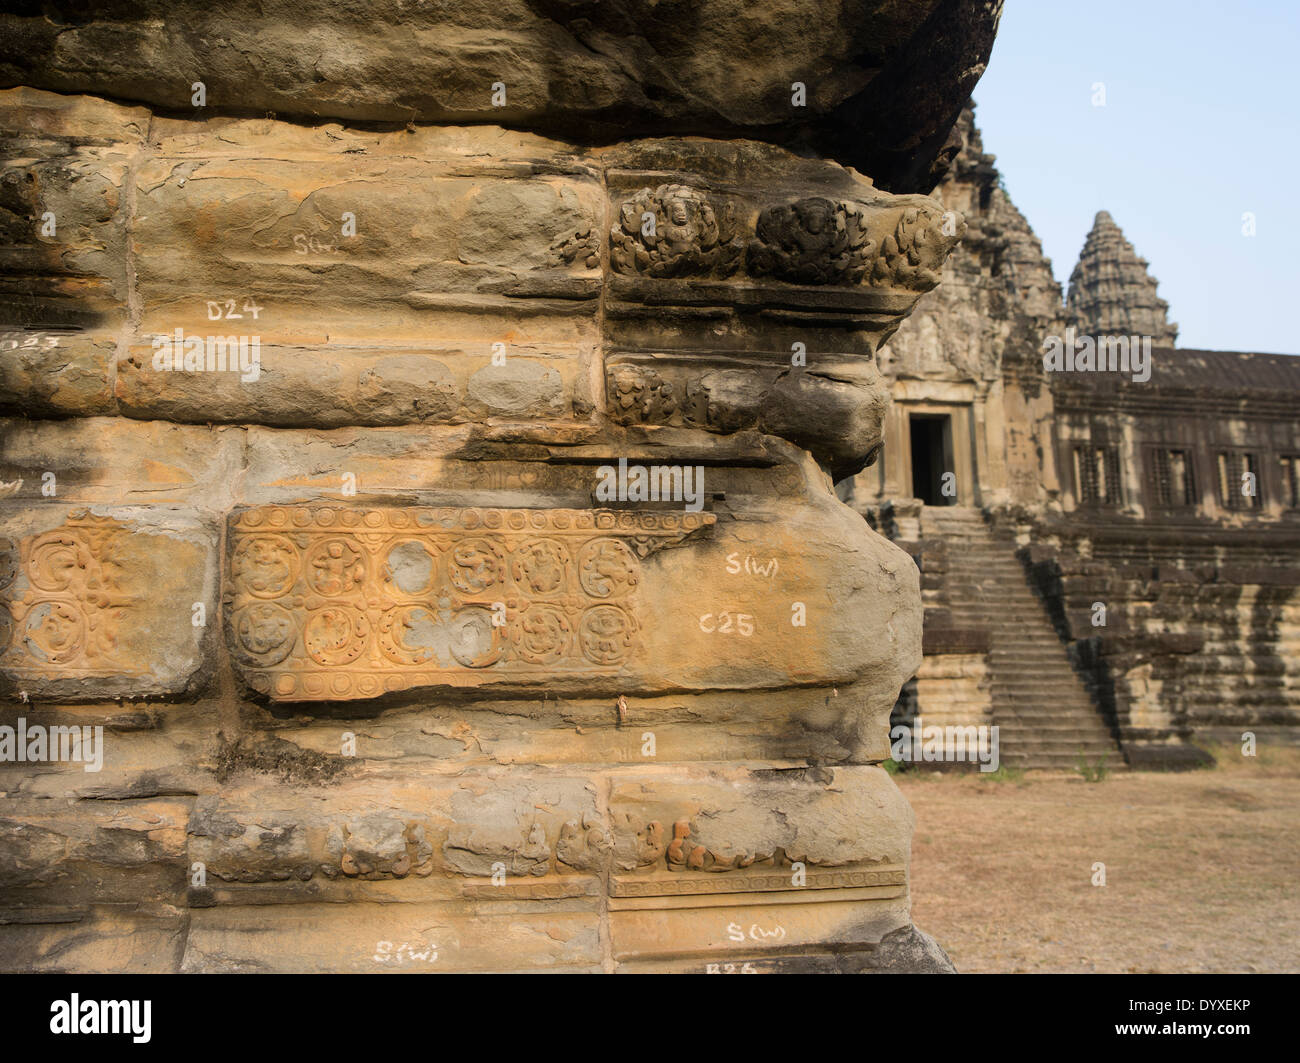 Numbers and letters written on stones documenting their position at Angkor Wat, UNESCO World Heritage Site. Siem Reap, Cambodia Stock Photo